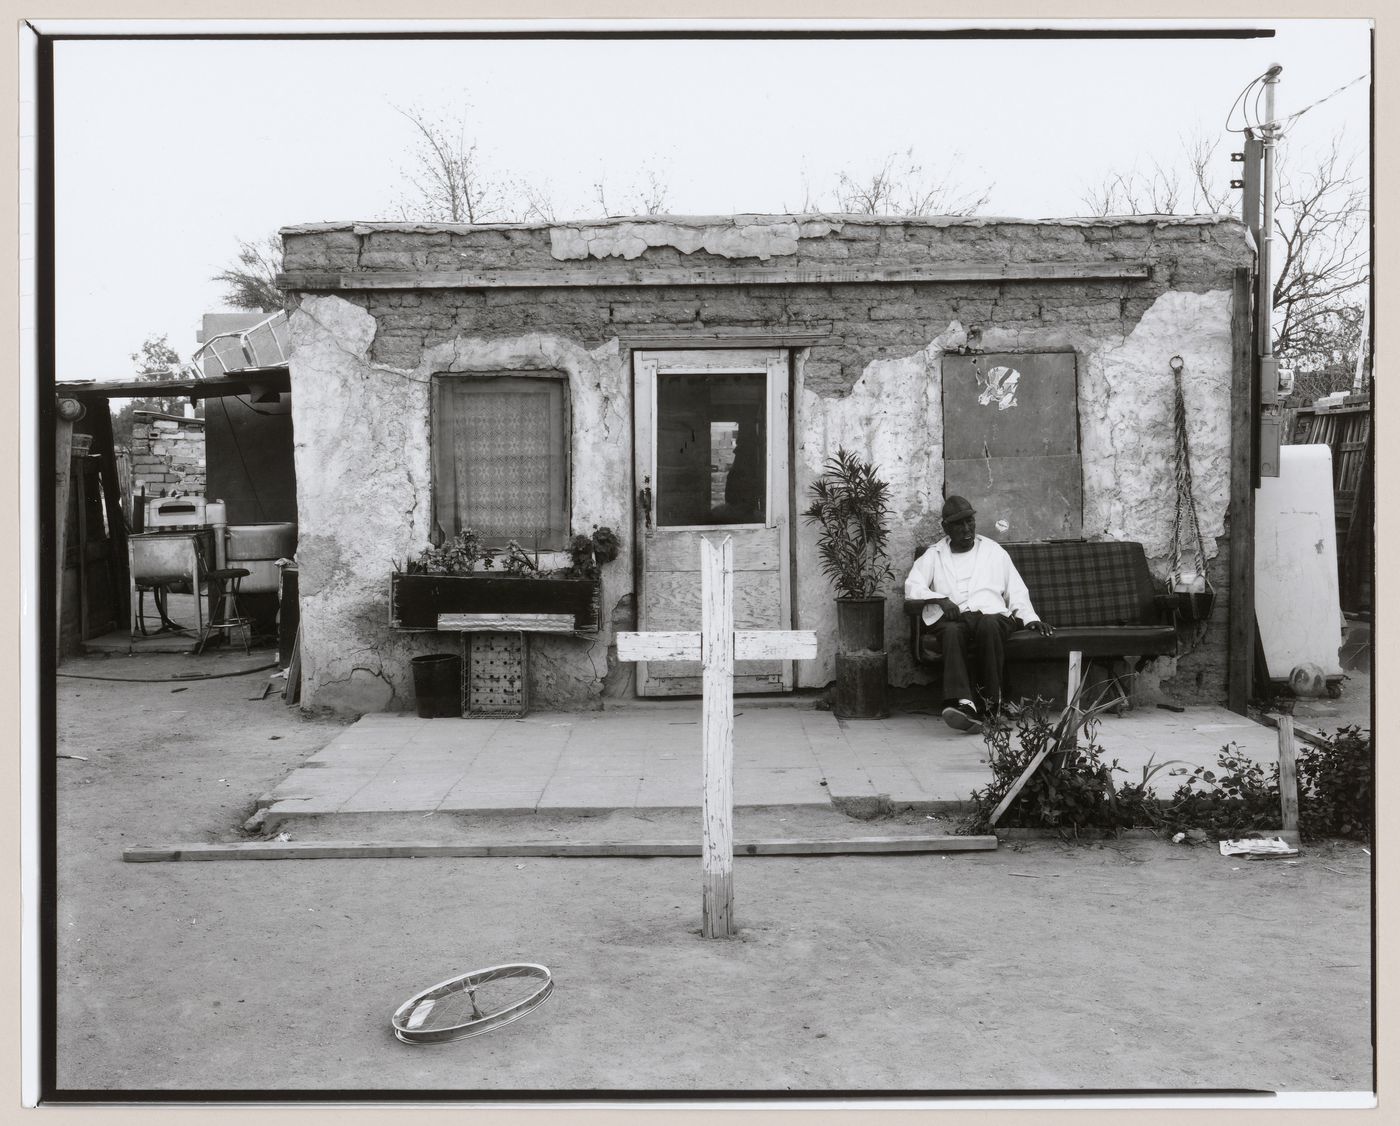 View of cross in yard in front of a house with a man sitting outside, Old Pascua, Tucson, Arizona, United States (from a series documenting the Yaqui community of Old Pascua)